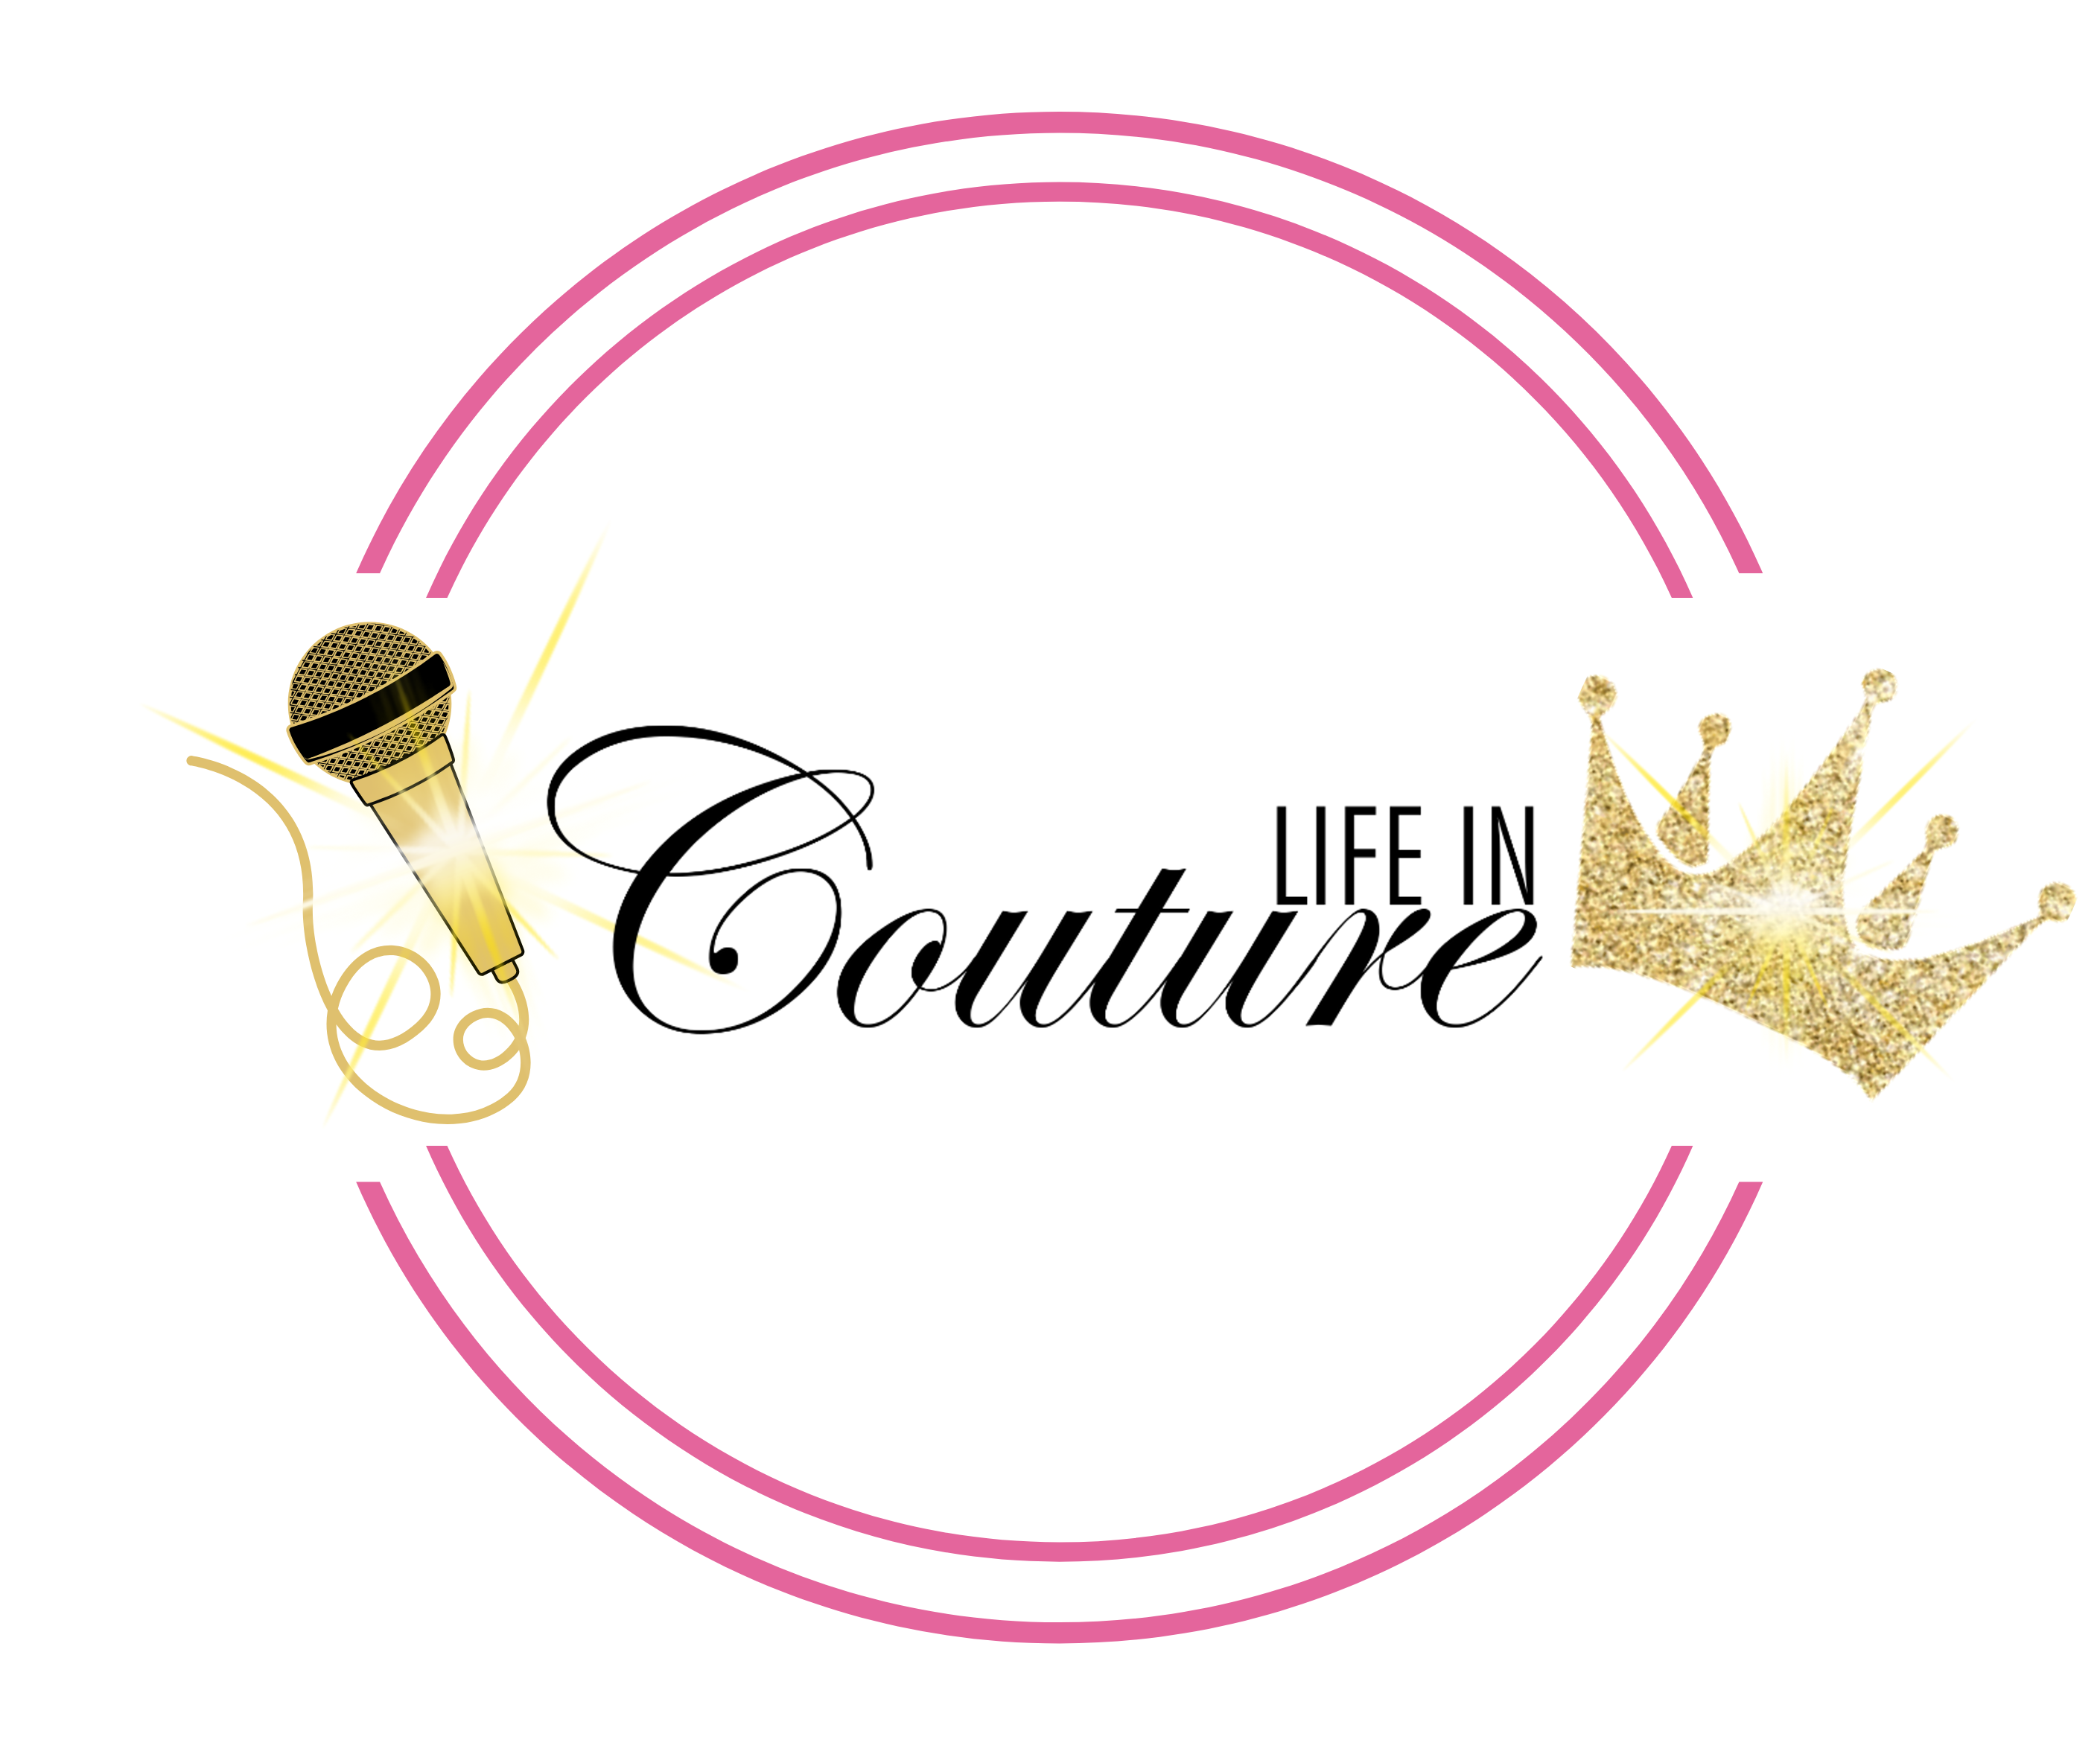 https://virtual-lyfe.com/wp-content/uploads/2019/10/Life-in-Couture-Final-transparent.png